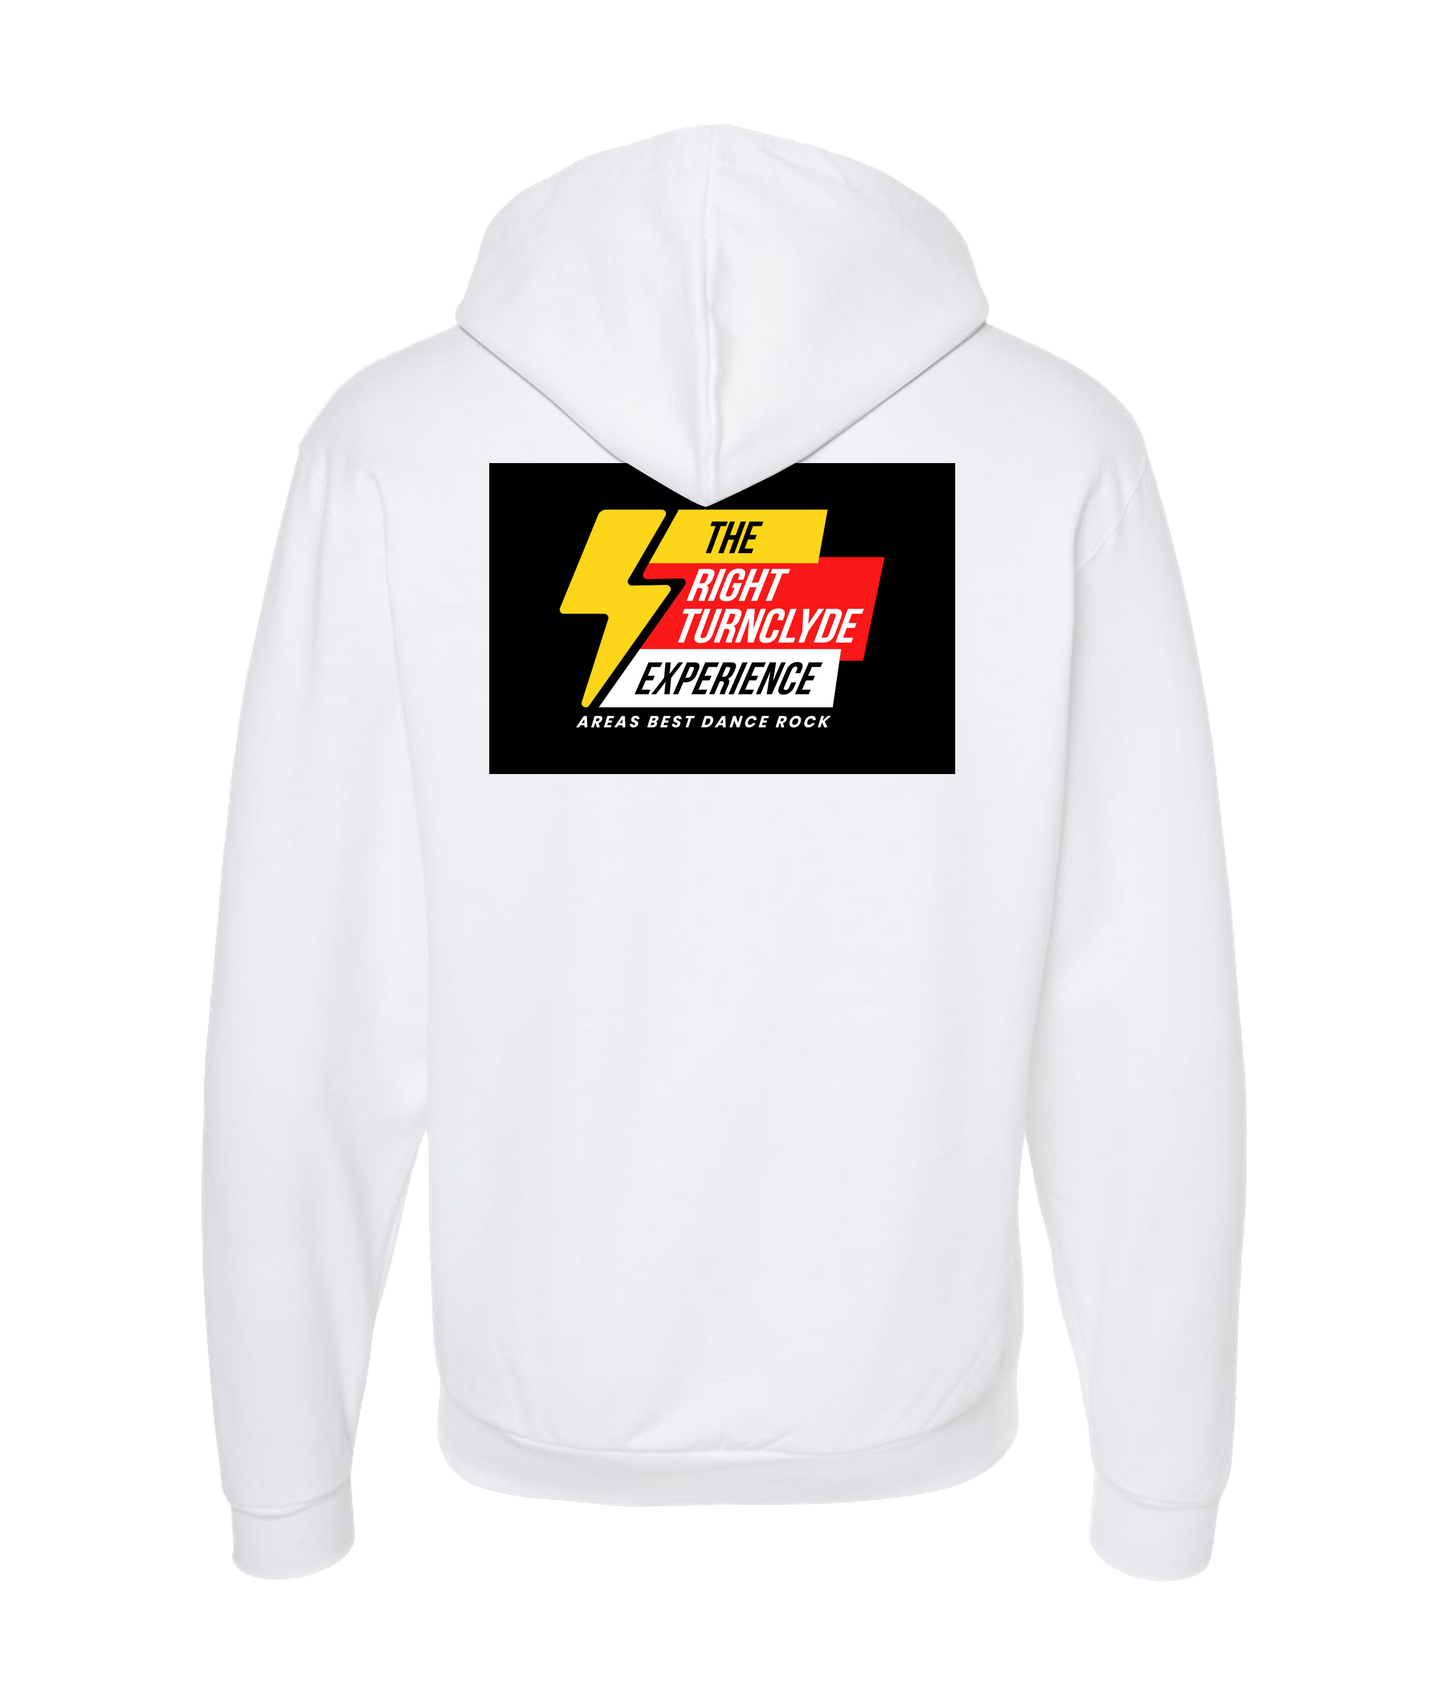 Right TurnClyde "Brucie Gear" Merchandise - The Experience - White Zip Up Hoodie